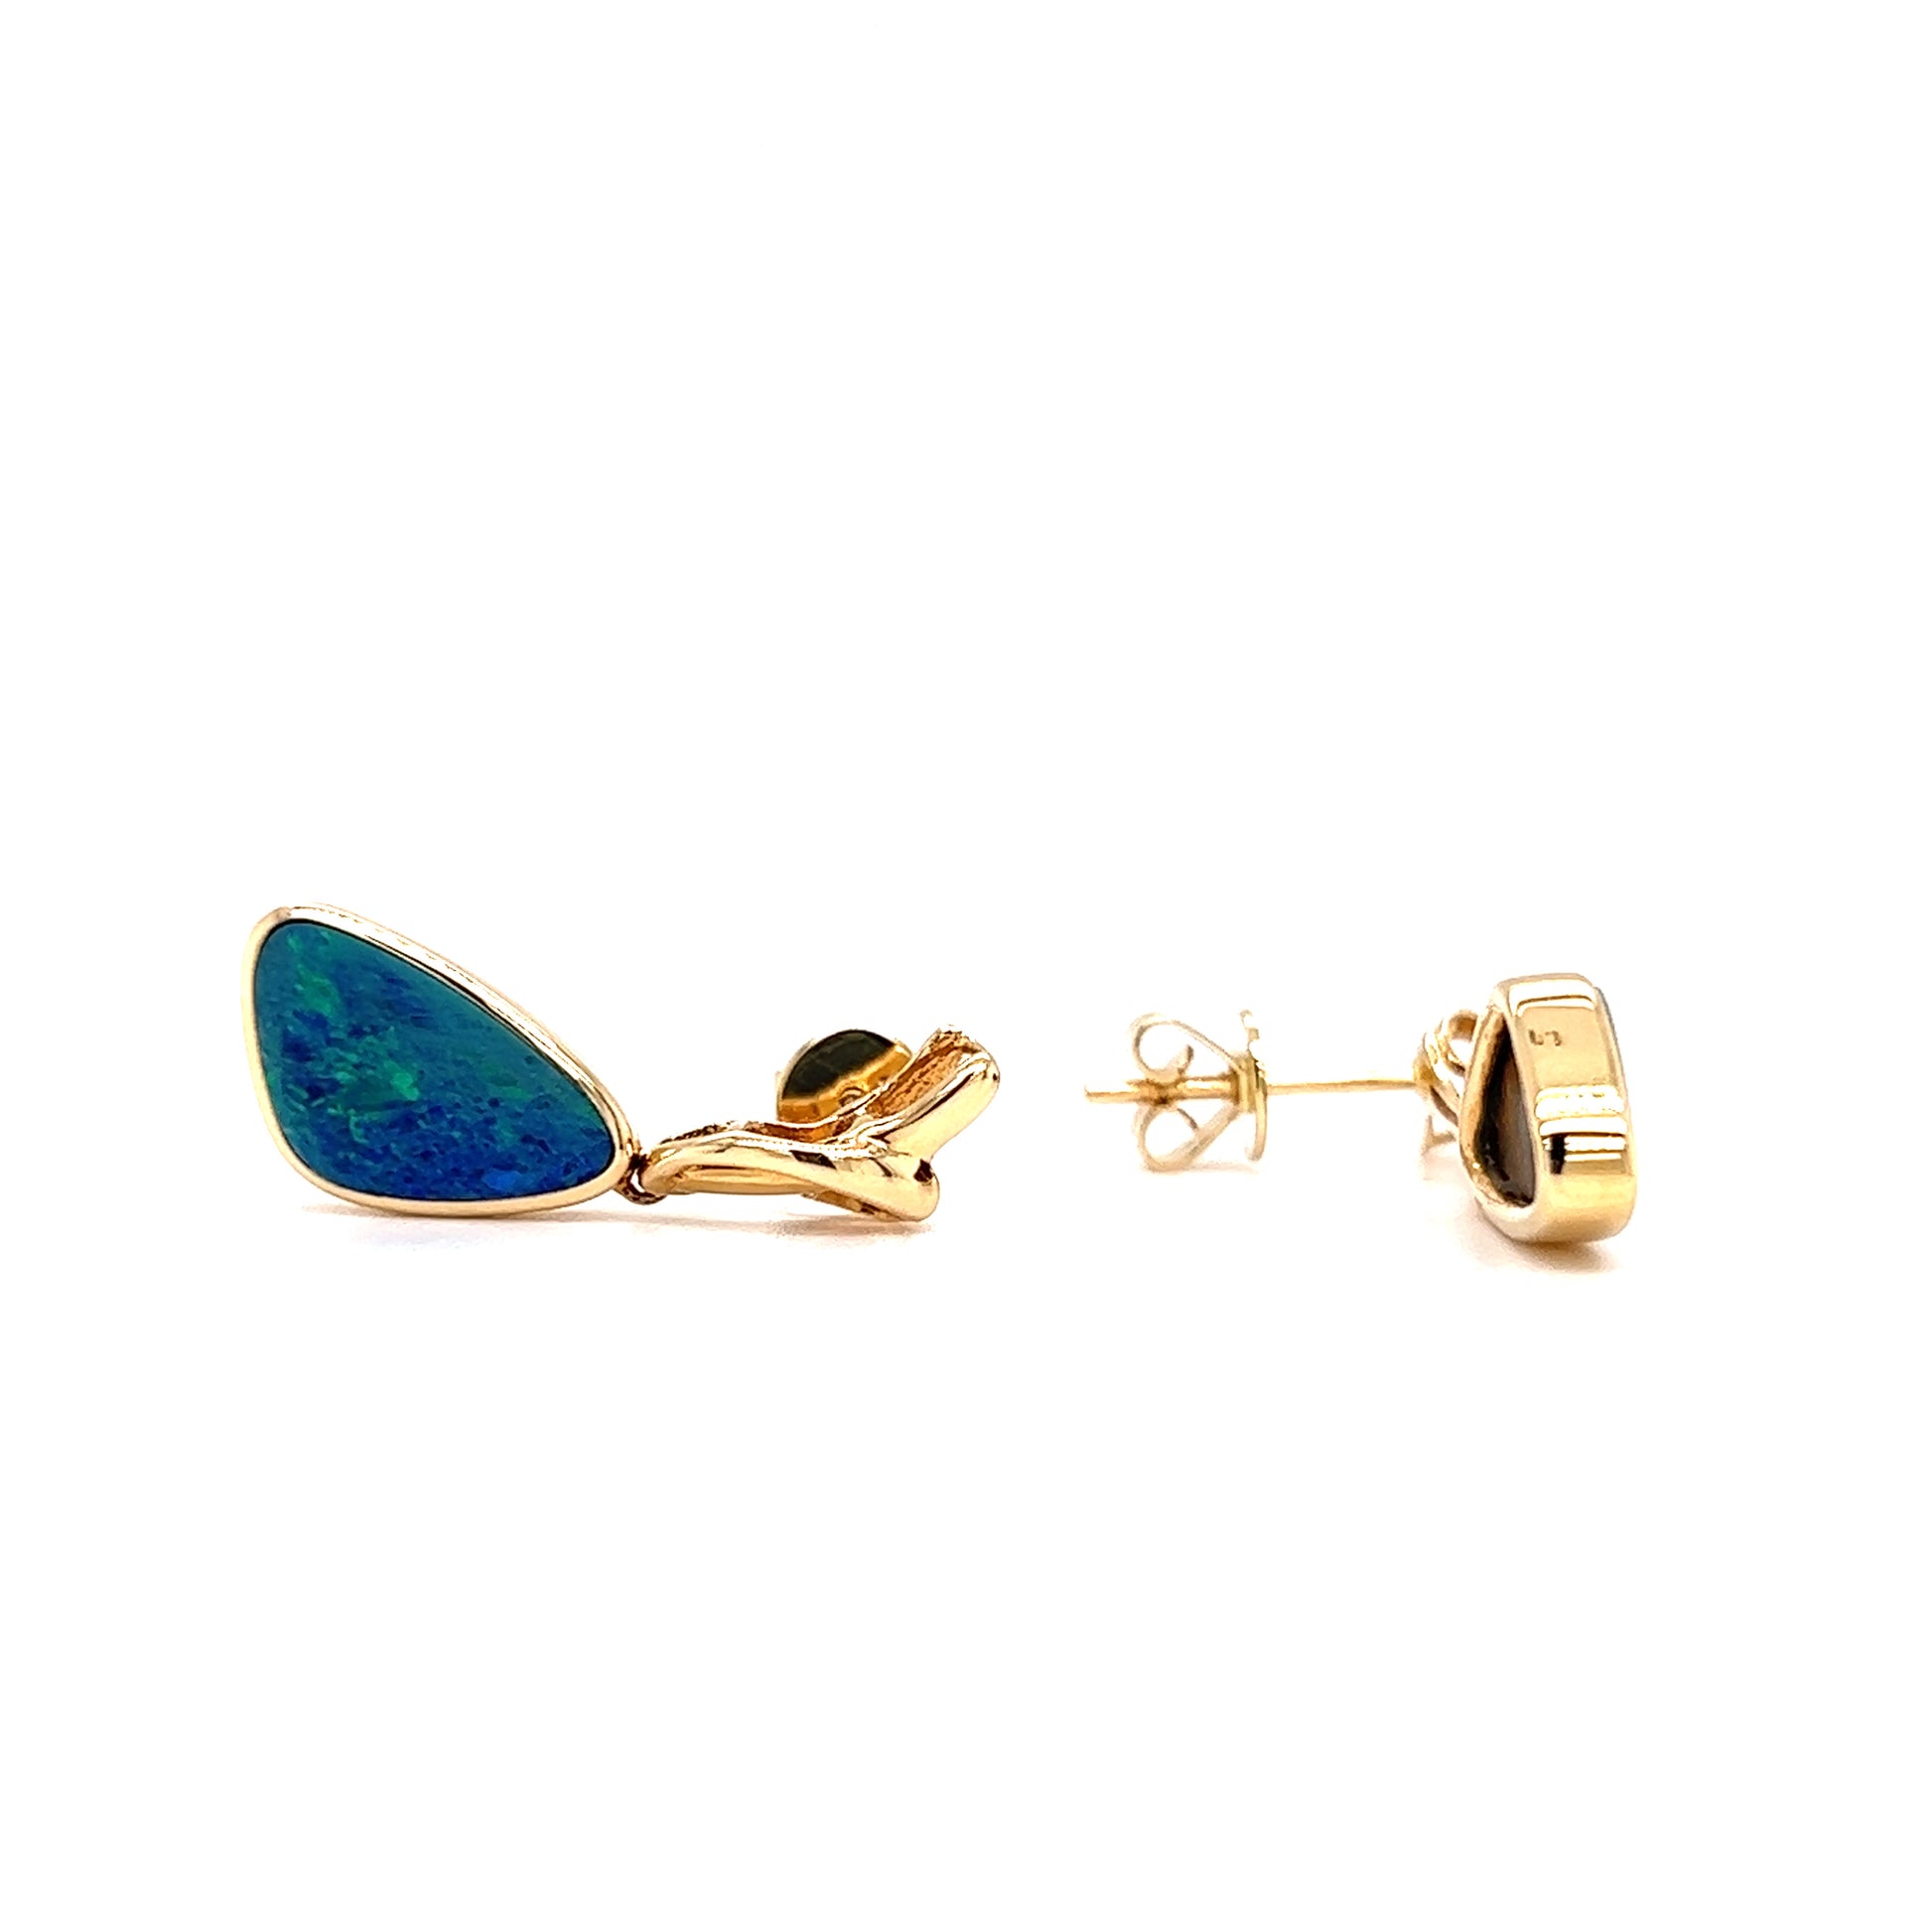 Black Opal Drop Earrings with 3.28ctw of Opal in 14K Yellow Gold Front and Side View